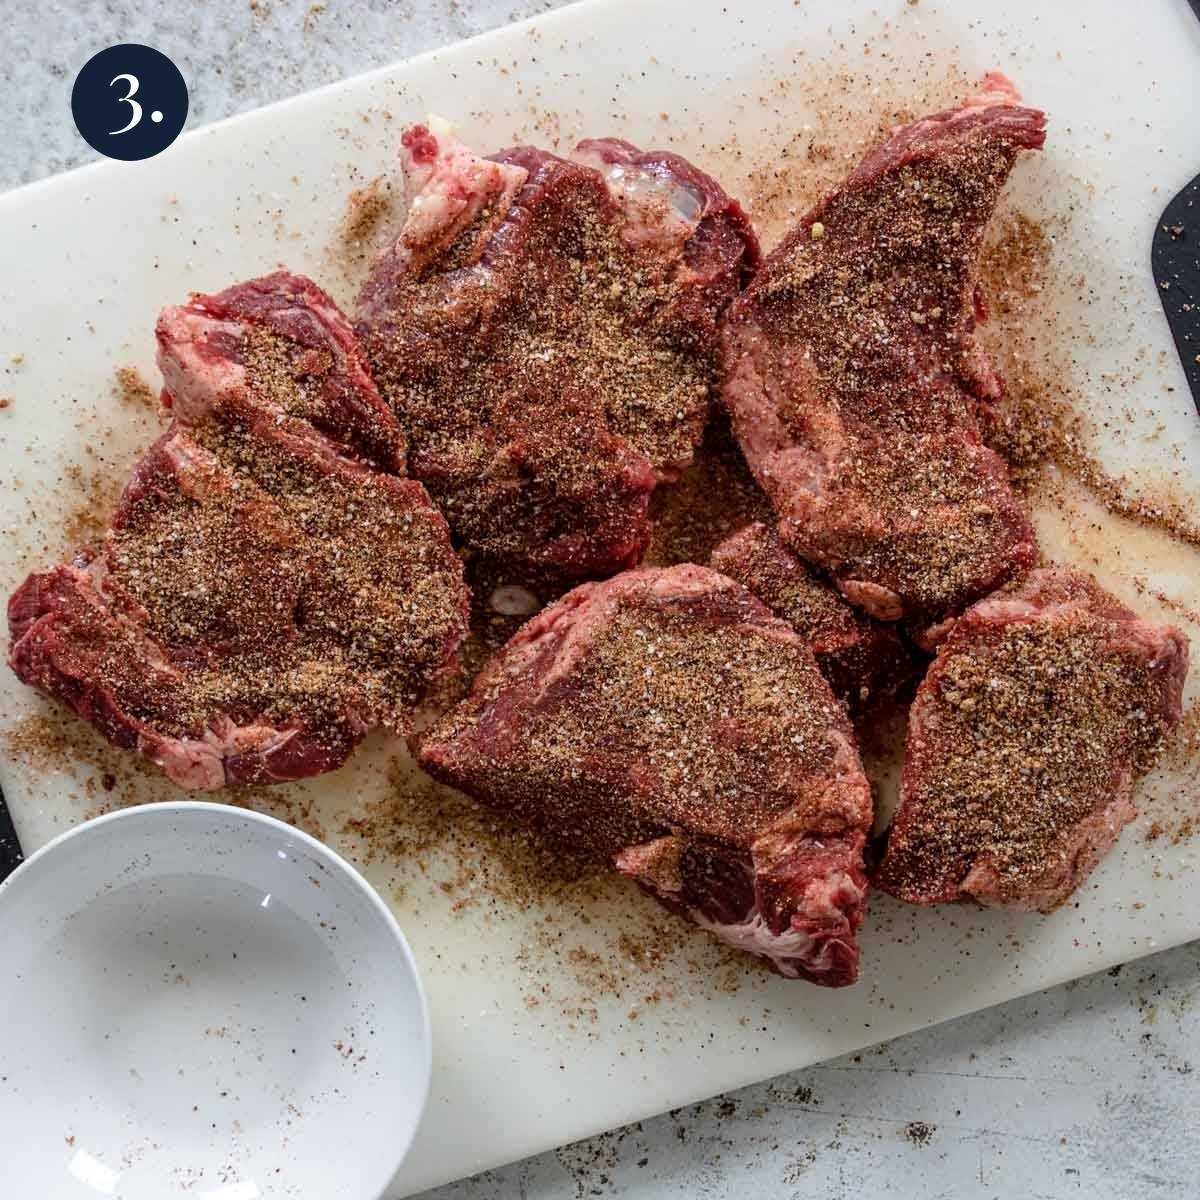 large beef chunks seasoned with spices and herbs